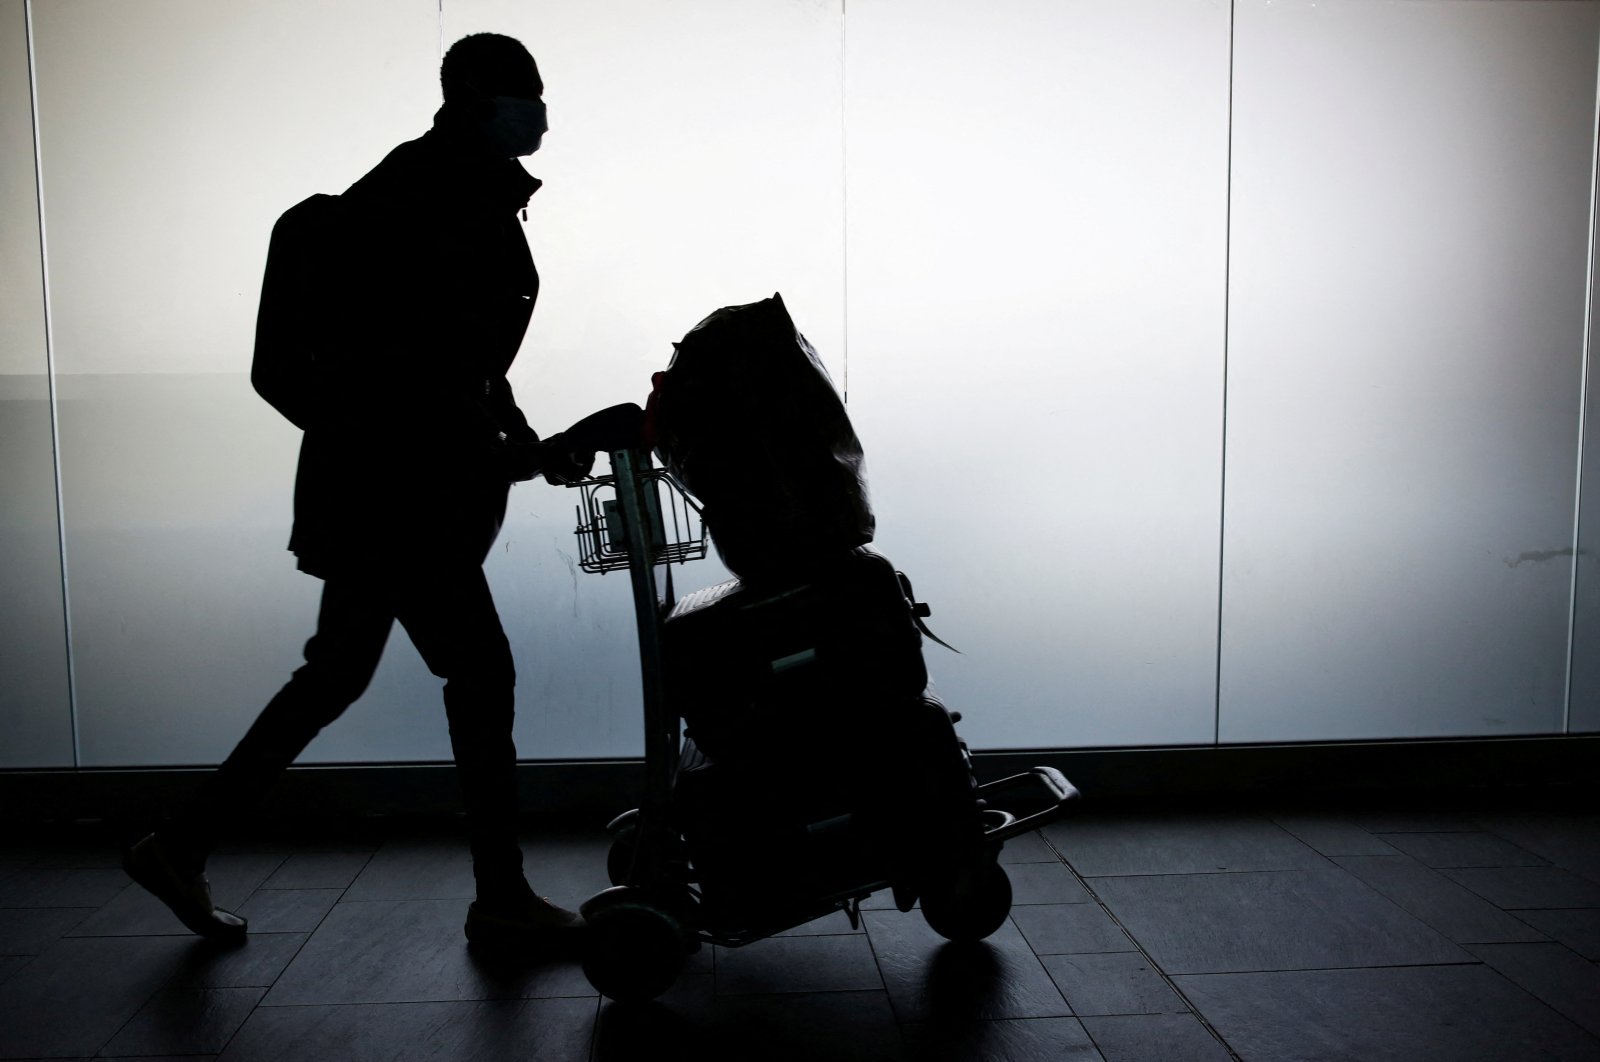 A man walks with his luggage at Fiumicino Airport amid the coronavirus pandemic, near Rome, Italy, May 17, 2021. (Reuters Photo)